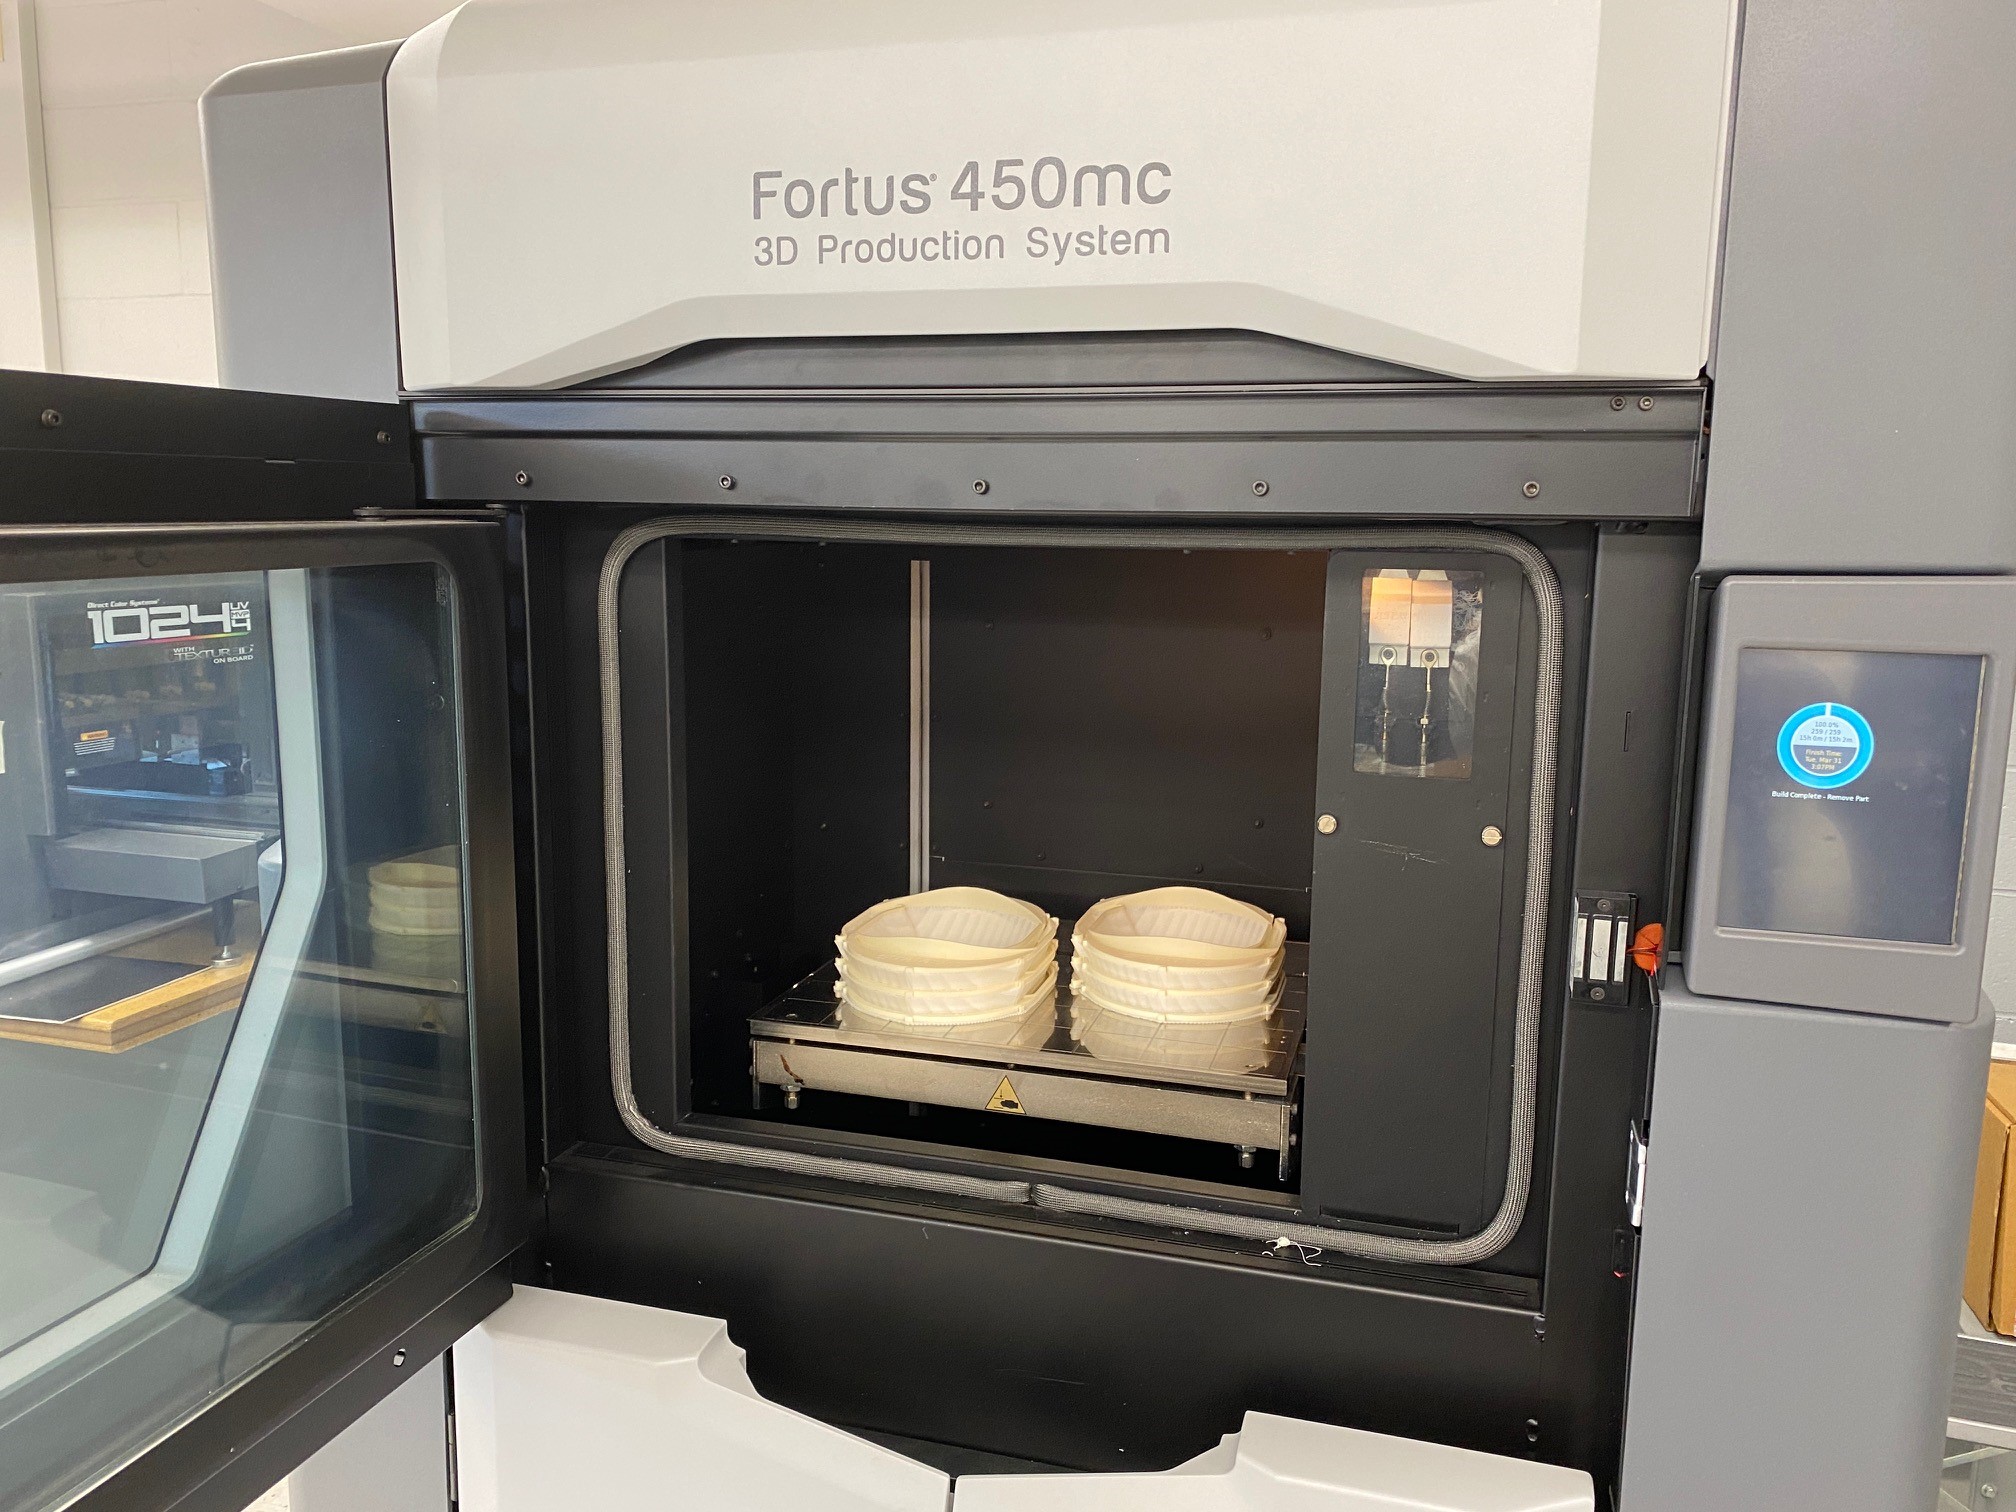 Queensborough's Stratasys J450™ 3D printer is making headbands for protective shields